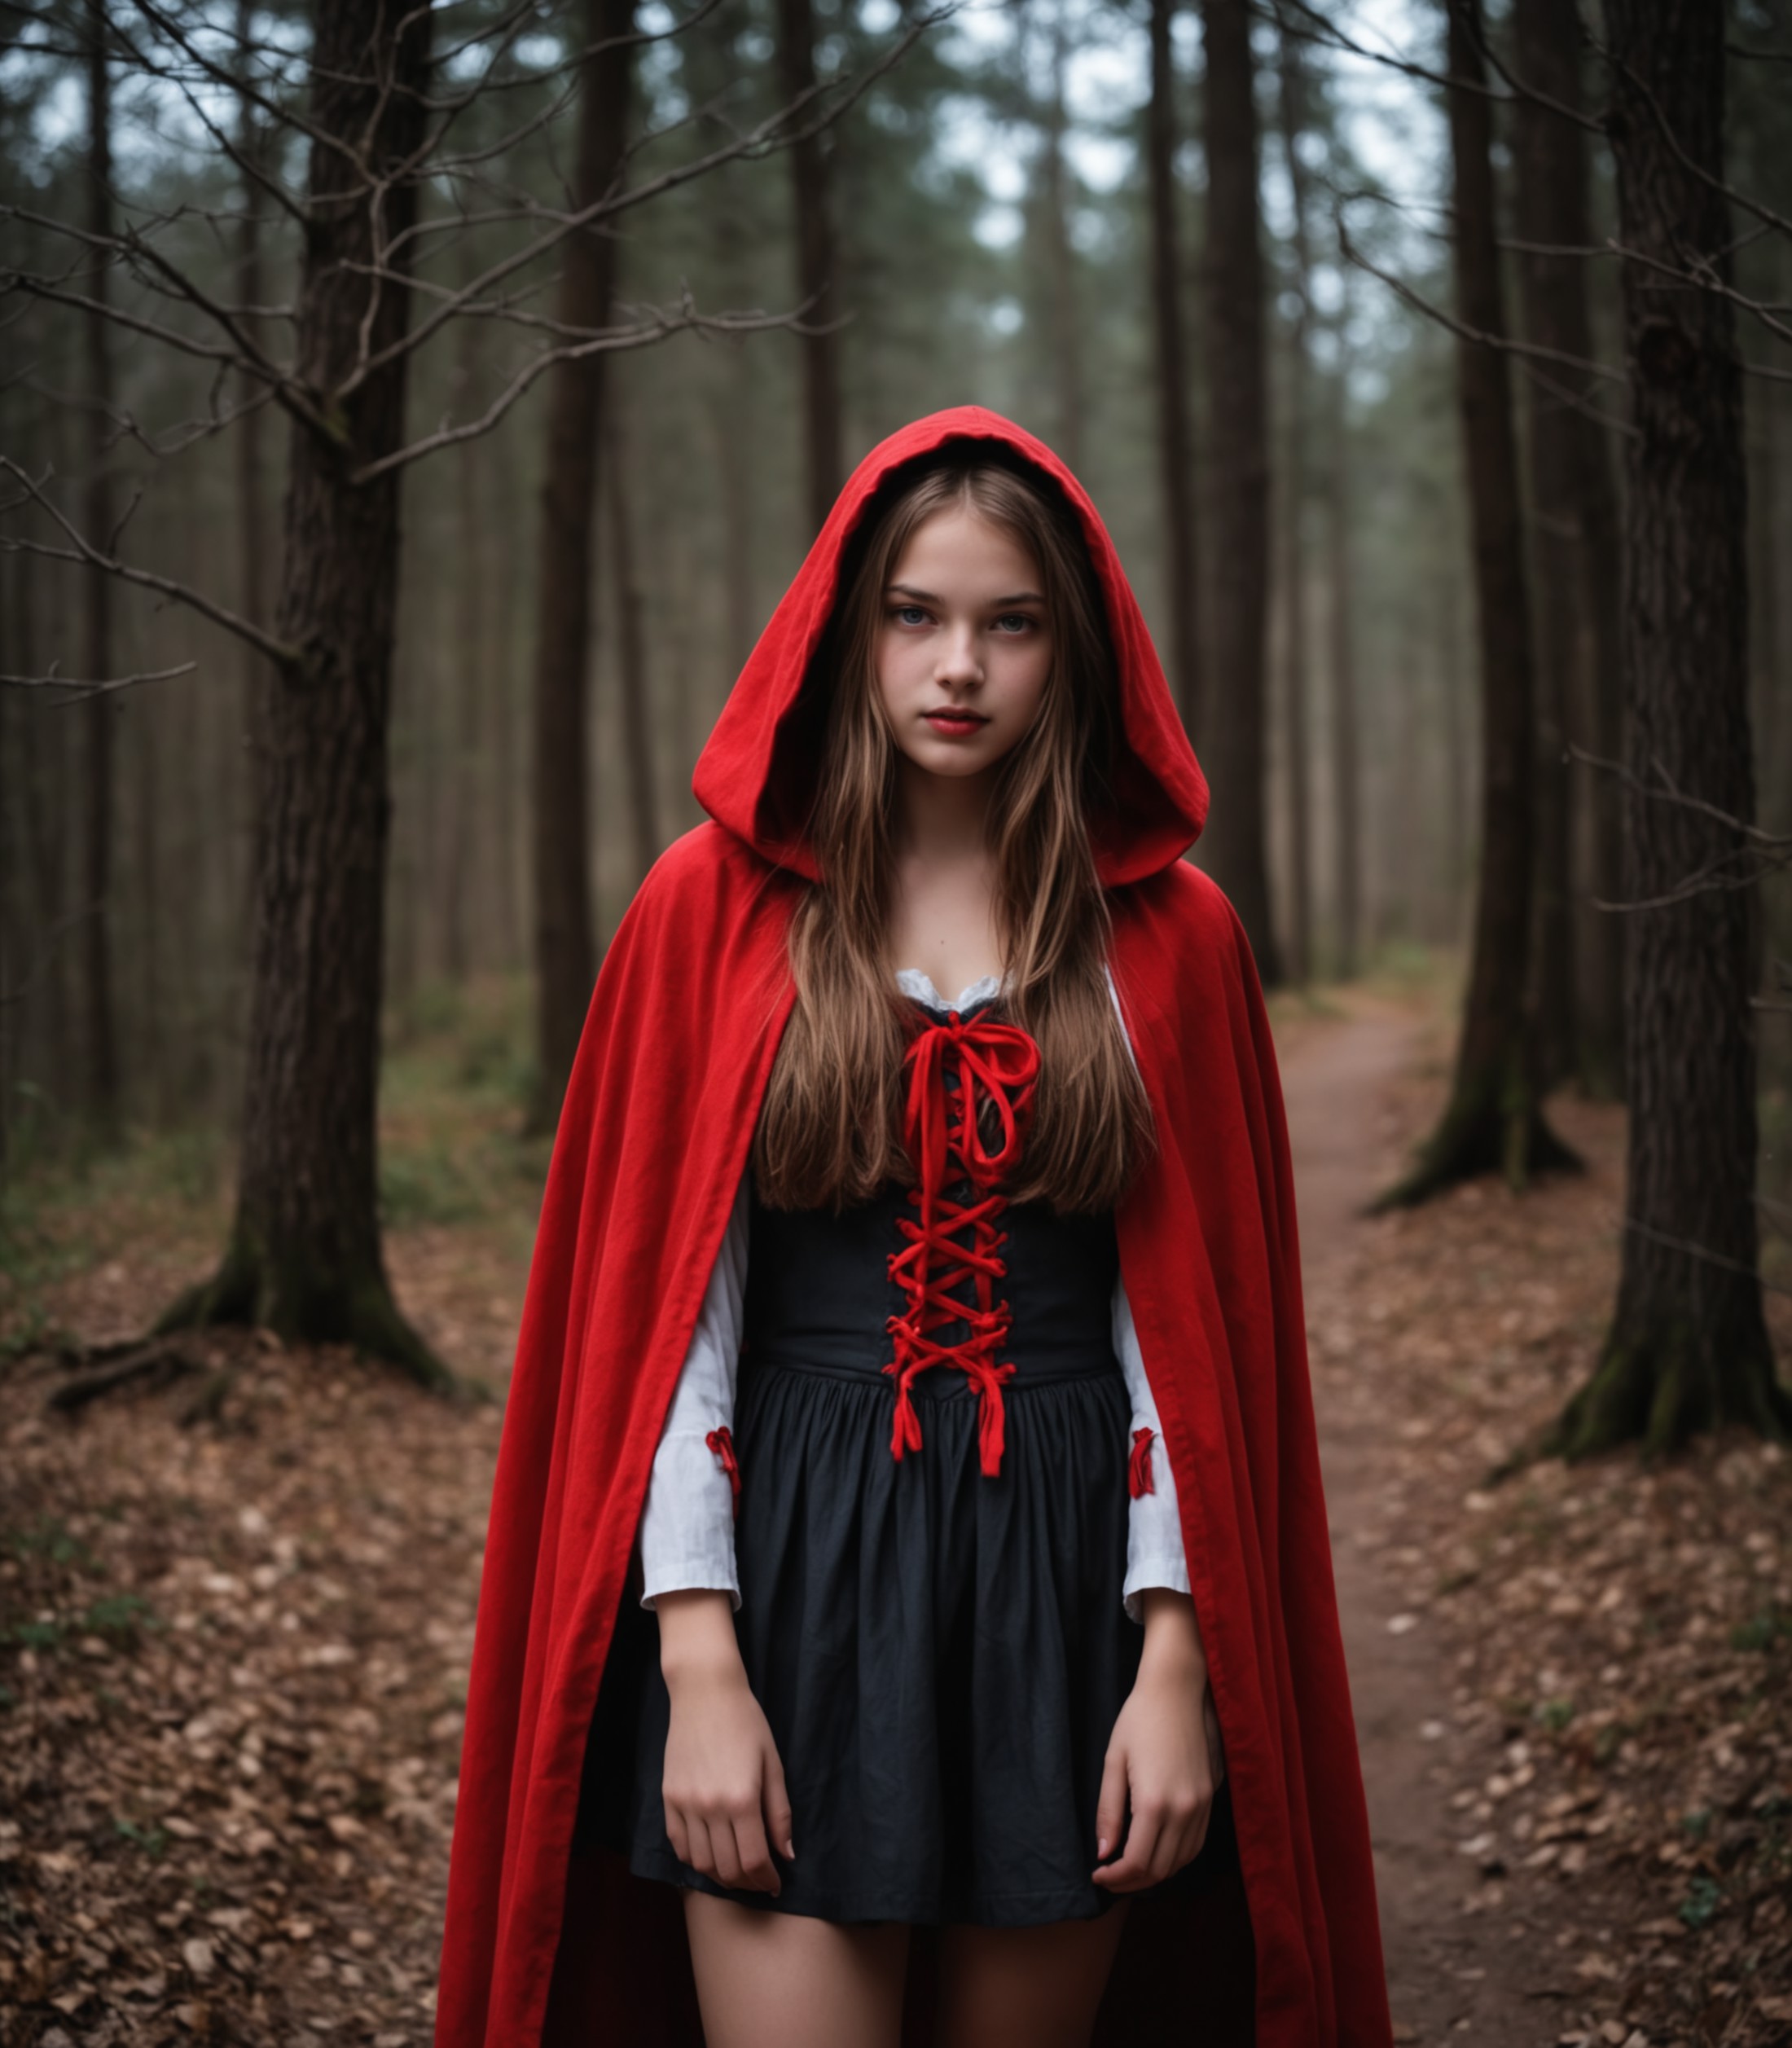 photo, Red Riding Hood, 18 years old, natural dark lighting,  best quality